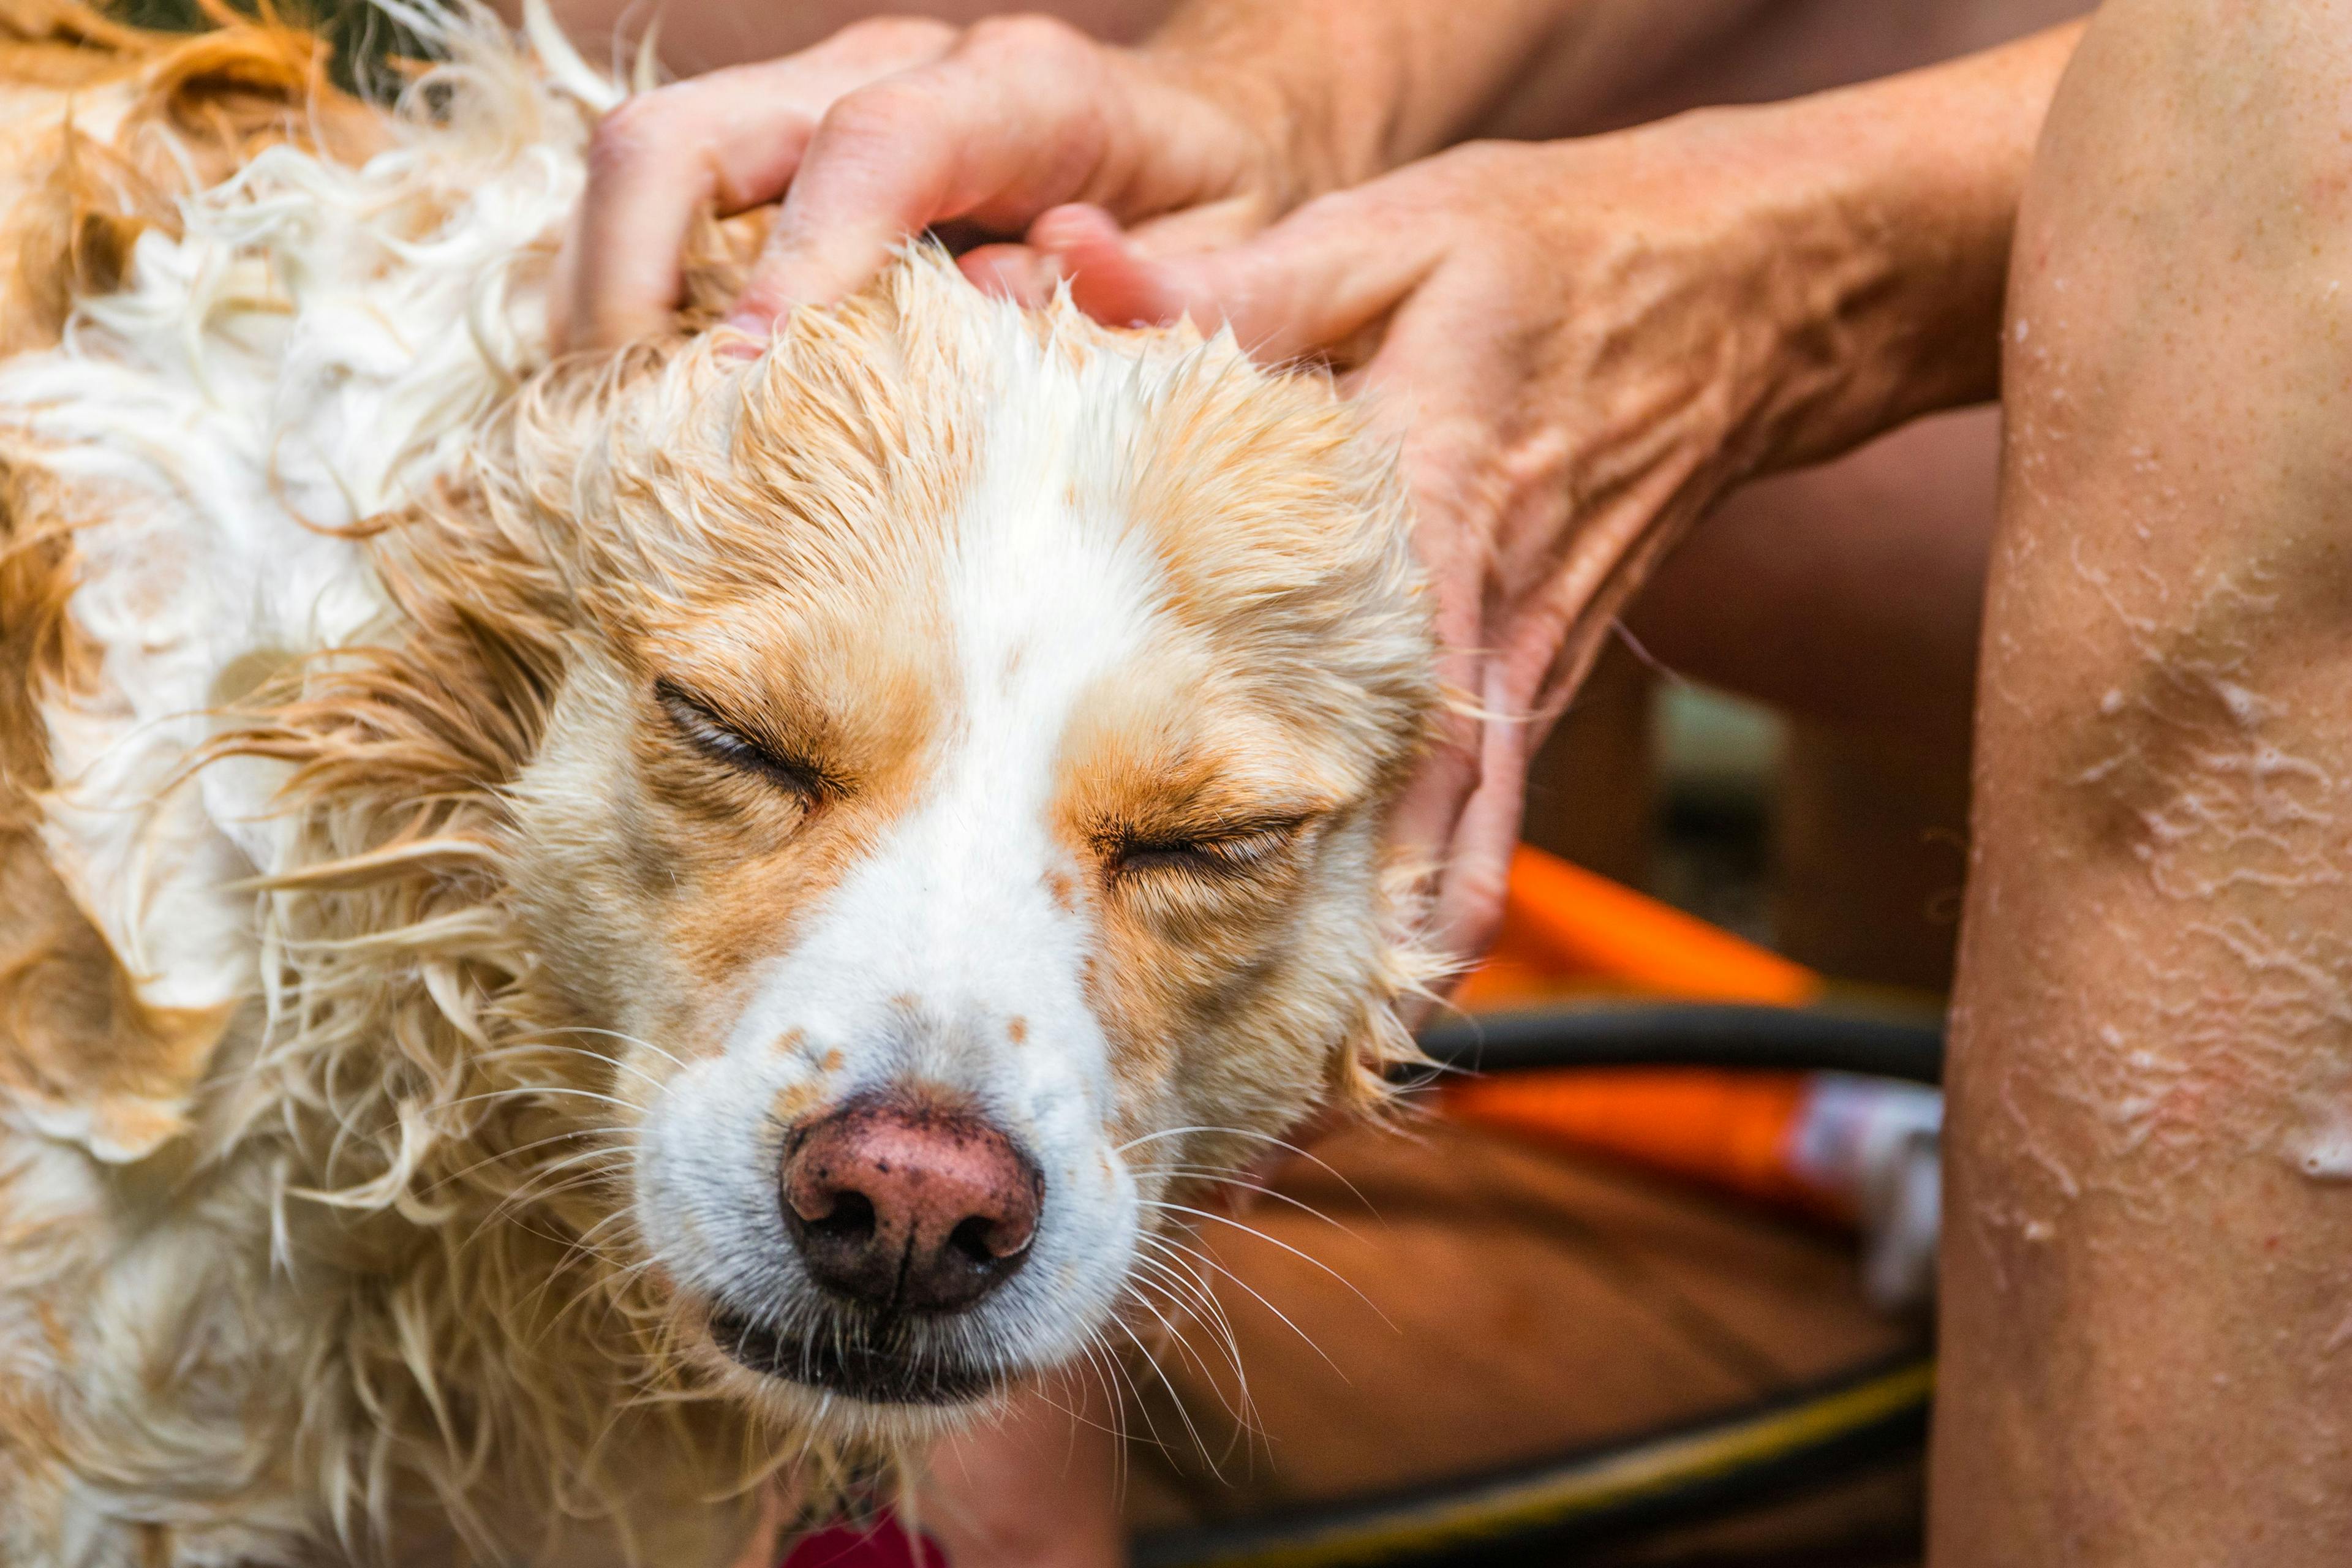 Emergency teams creates new canine decontamination guidelines 